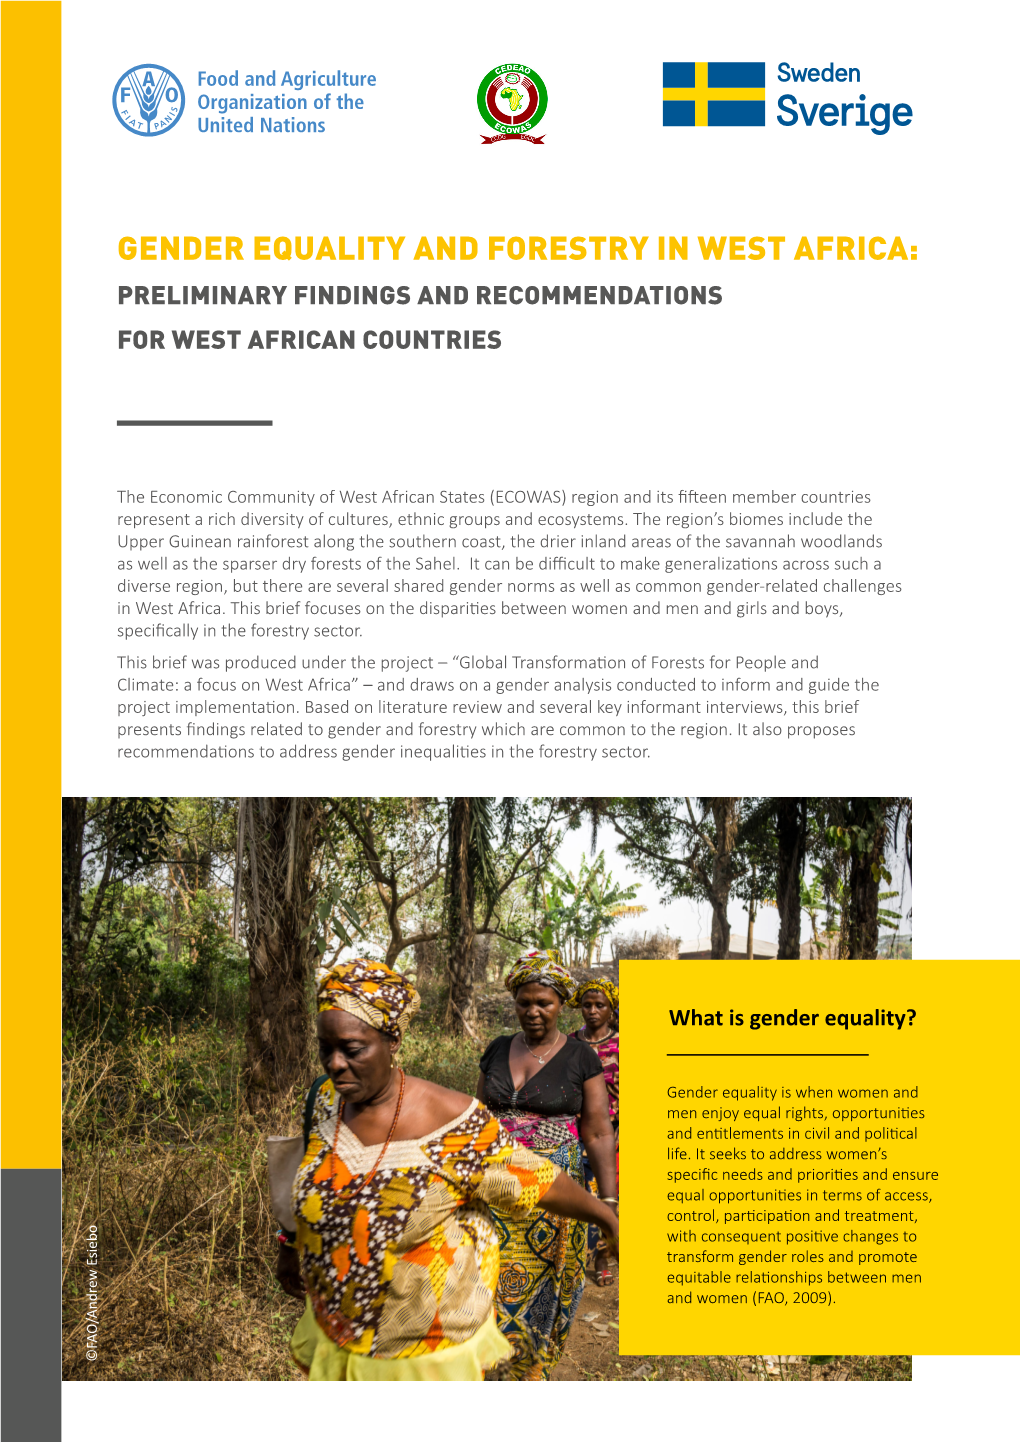 Gender Equality and Forestry in West Africa: Preliminary Findings and Recommendations for West African Countries